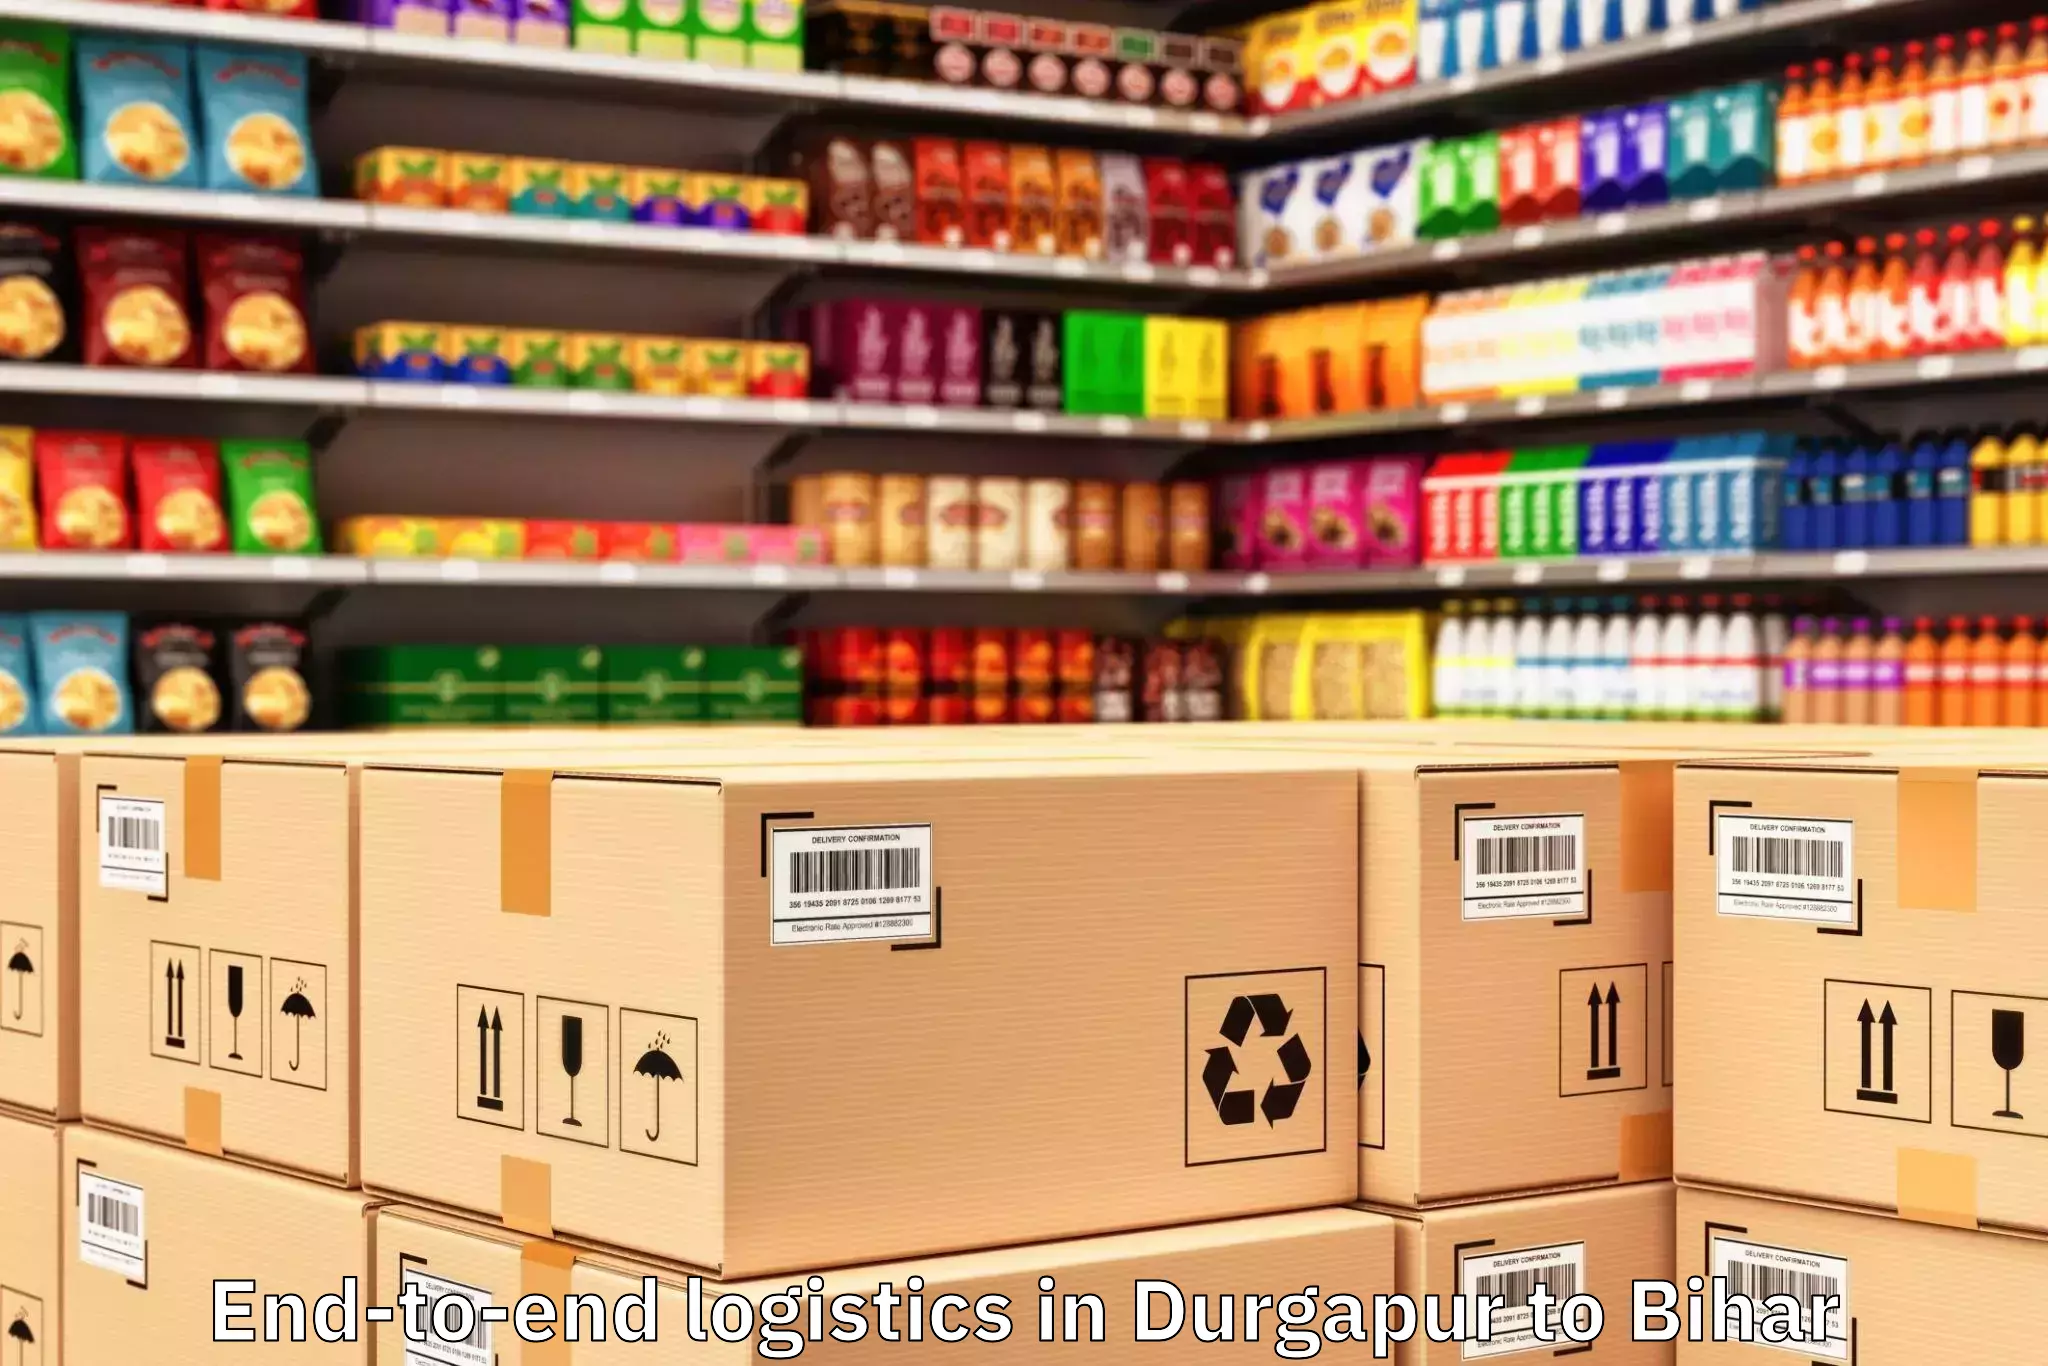 Top Durgapur to Narkatiaganj End To End Logistics Available